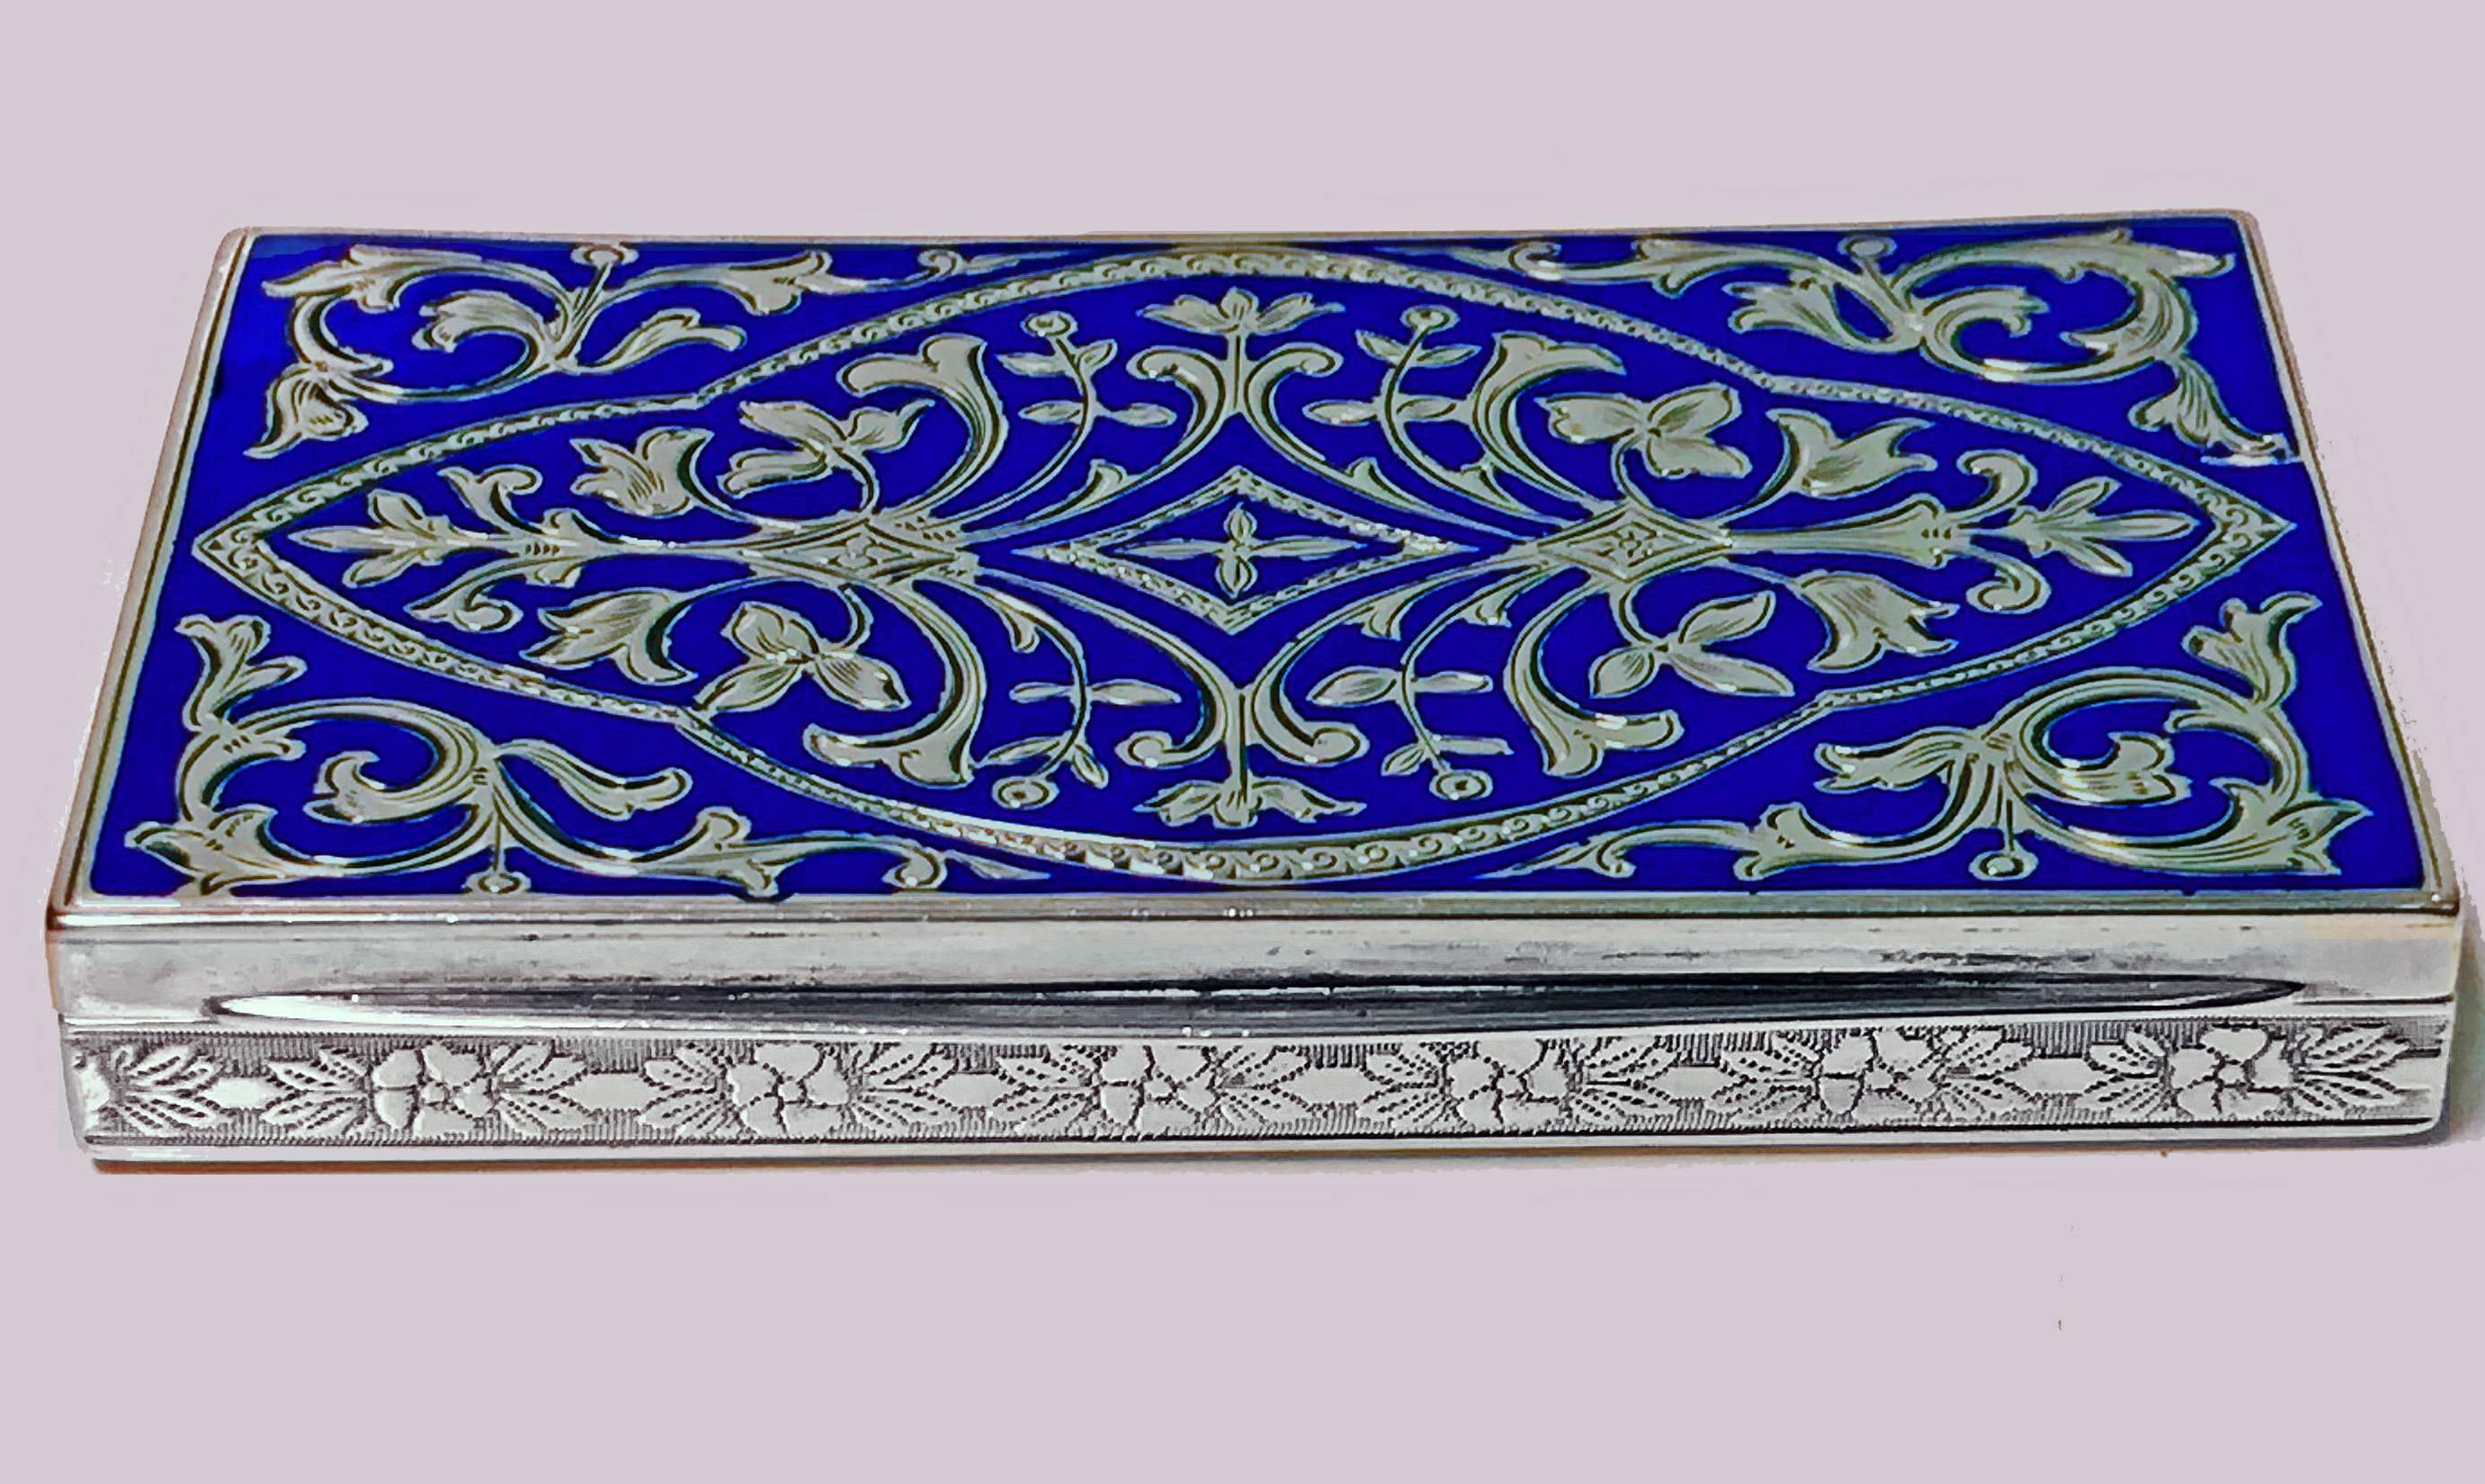 Continental Silver and royal blue Enamel Box, C.1920. The rectangular shape box with front cover royal blue enamel with inlay of fleur de lys foliage silver decoration, the sides with engraved foliage rosette border against stippled background, the